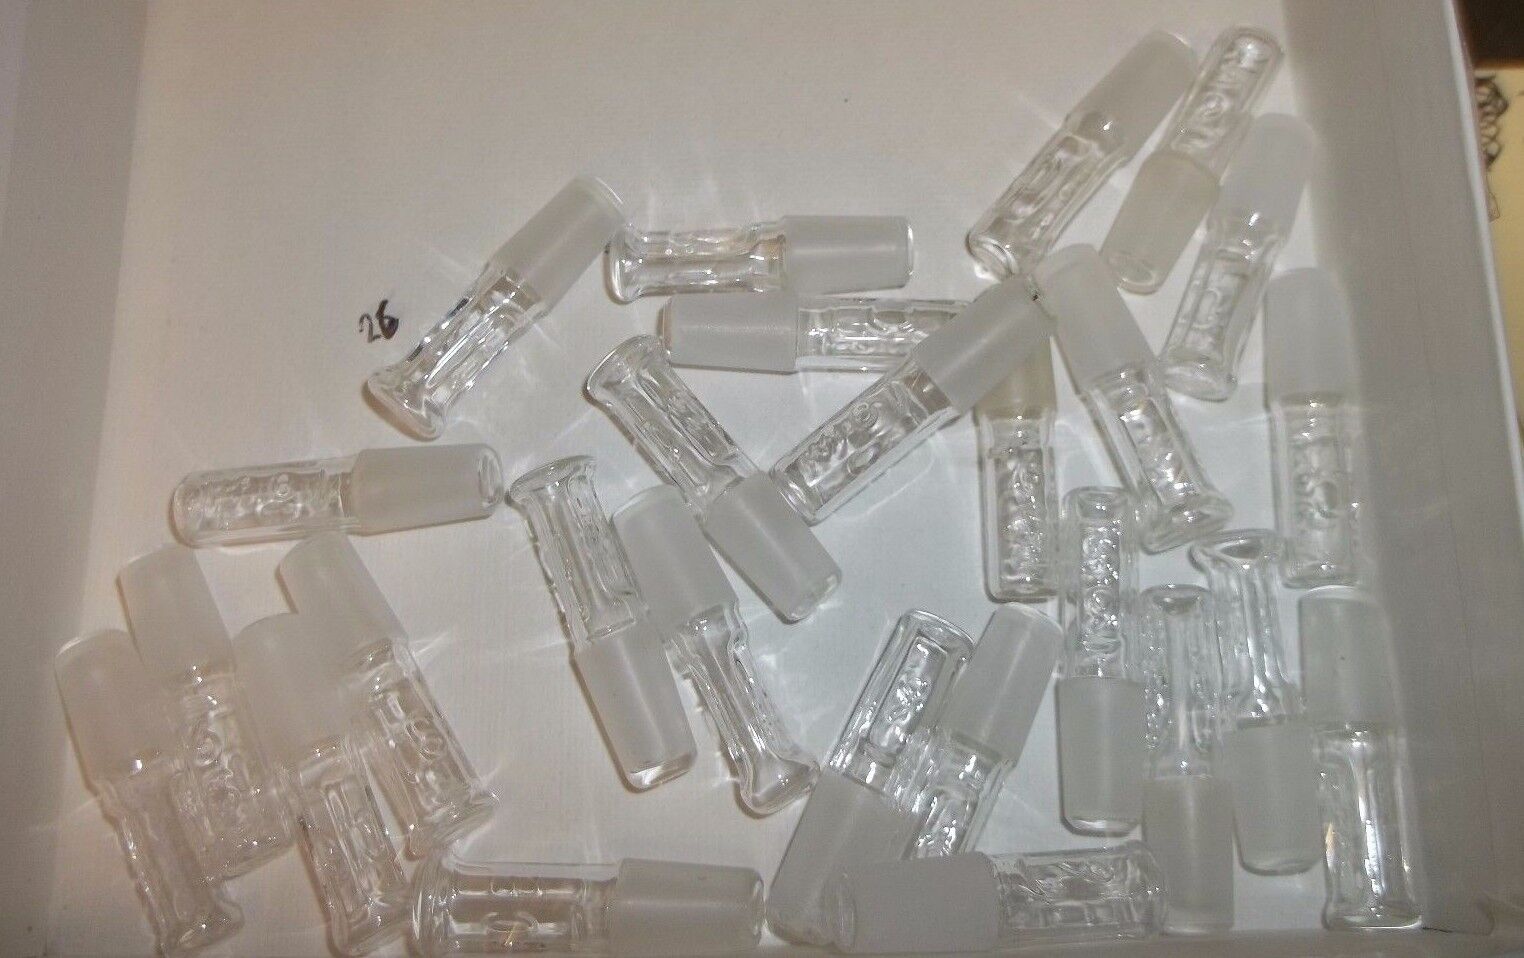 LAB GLASS STOPPERS #9 HOLLOW LOT OF 26 CORNING?     (NN4)